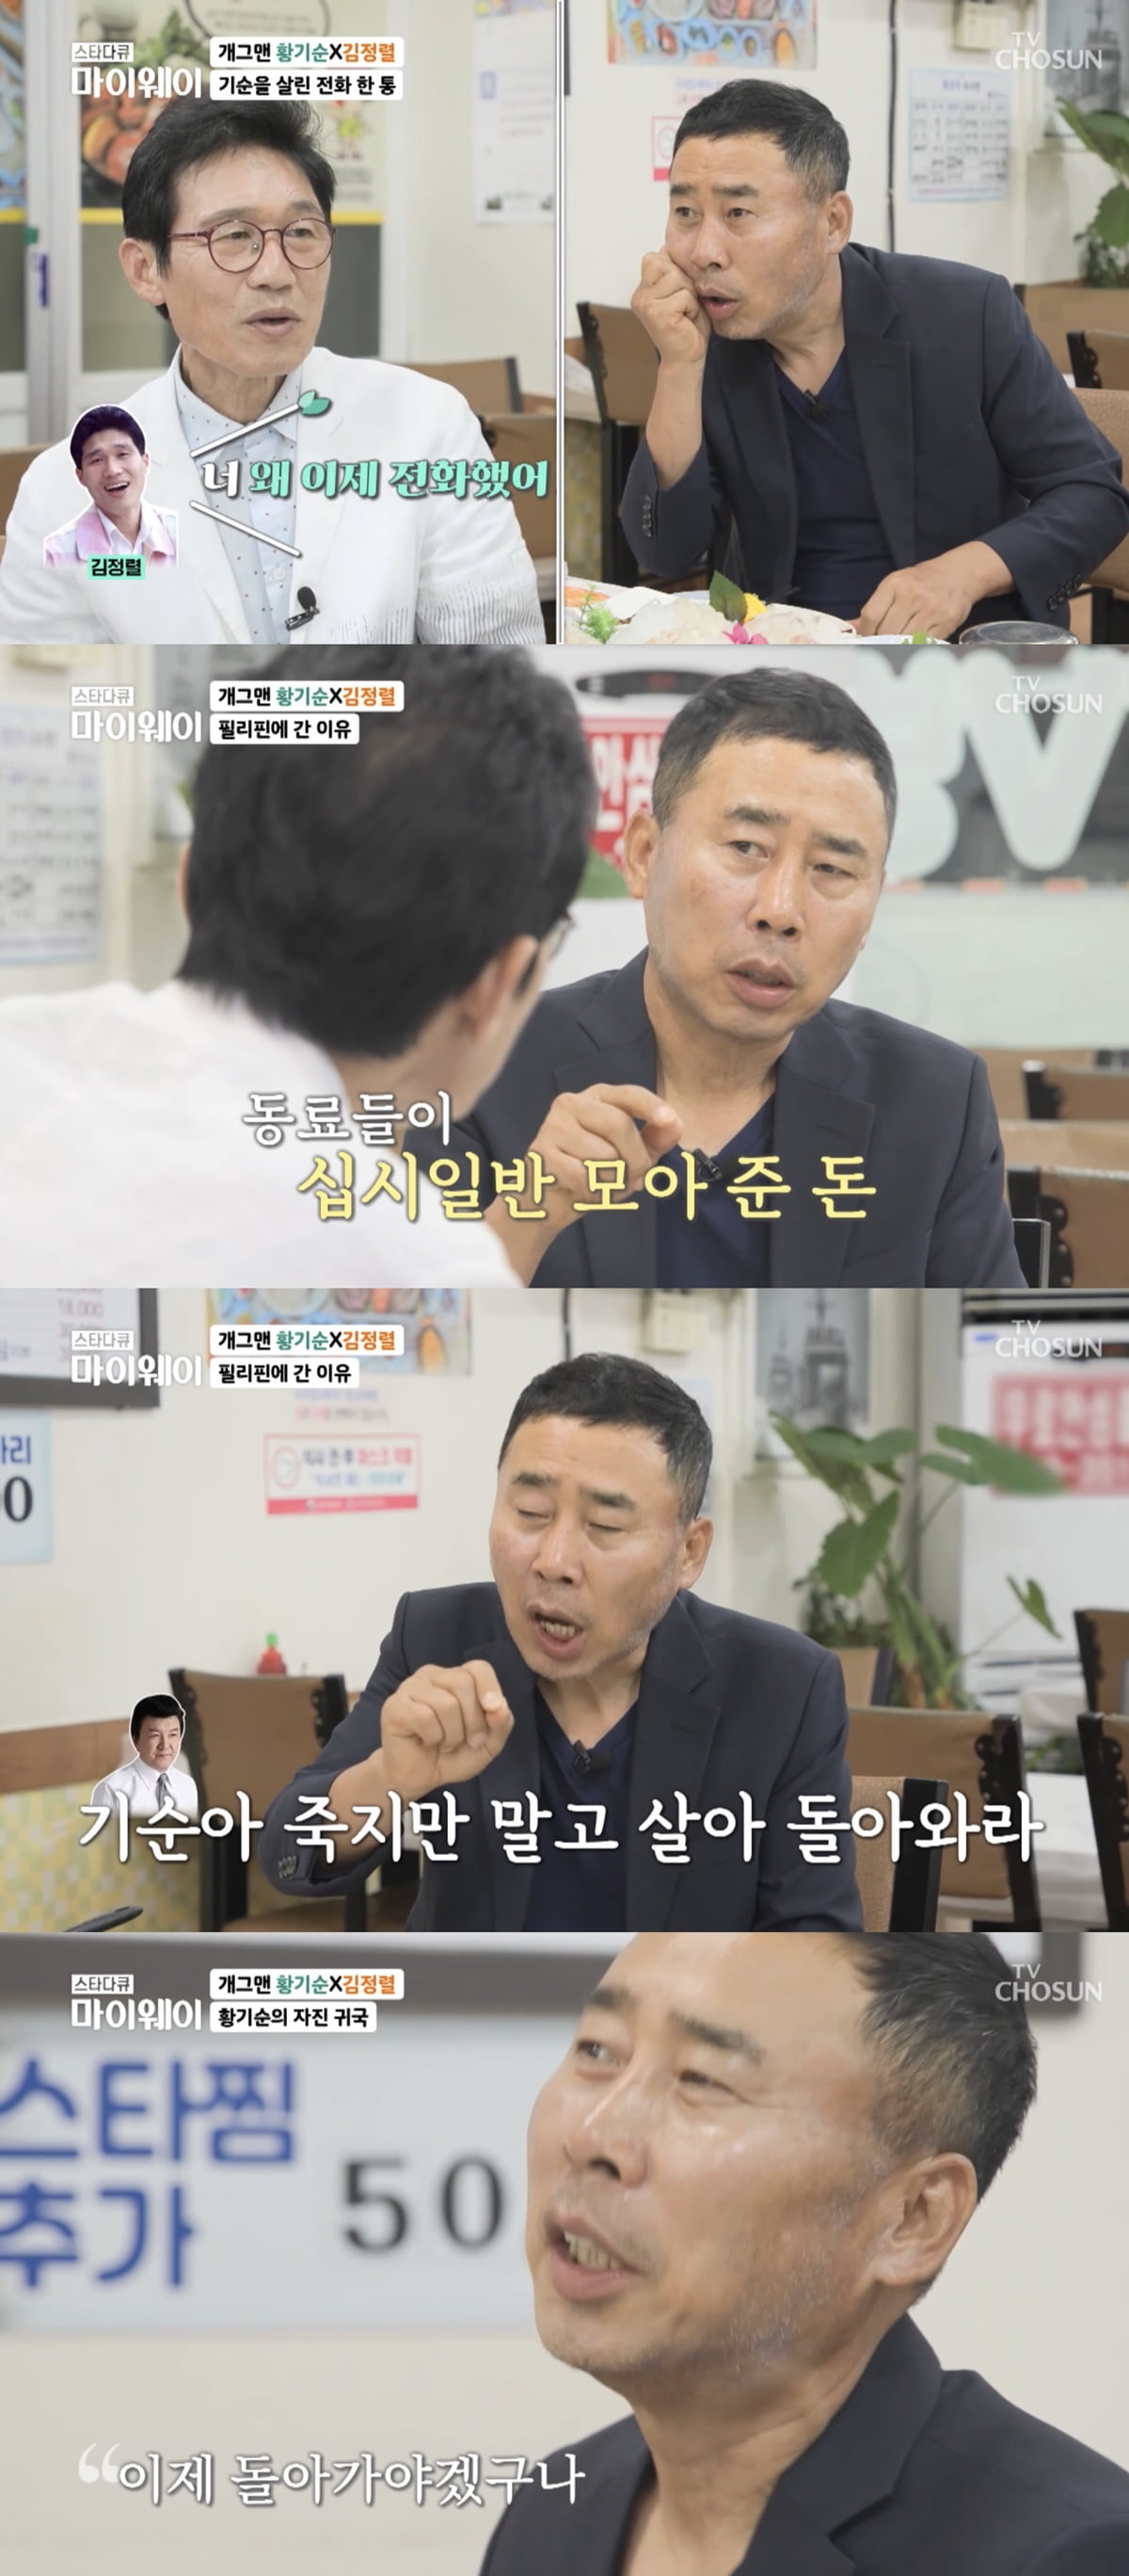 ‘Expedition gamble’ Hwang Ki-sun “Hope in the phrase ‘Don’t die, but come back alive’”